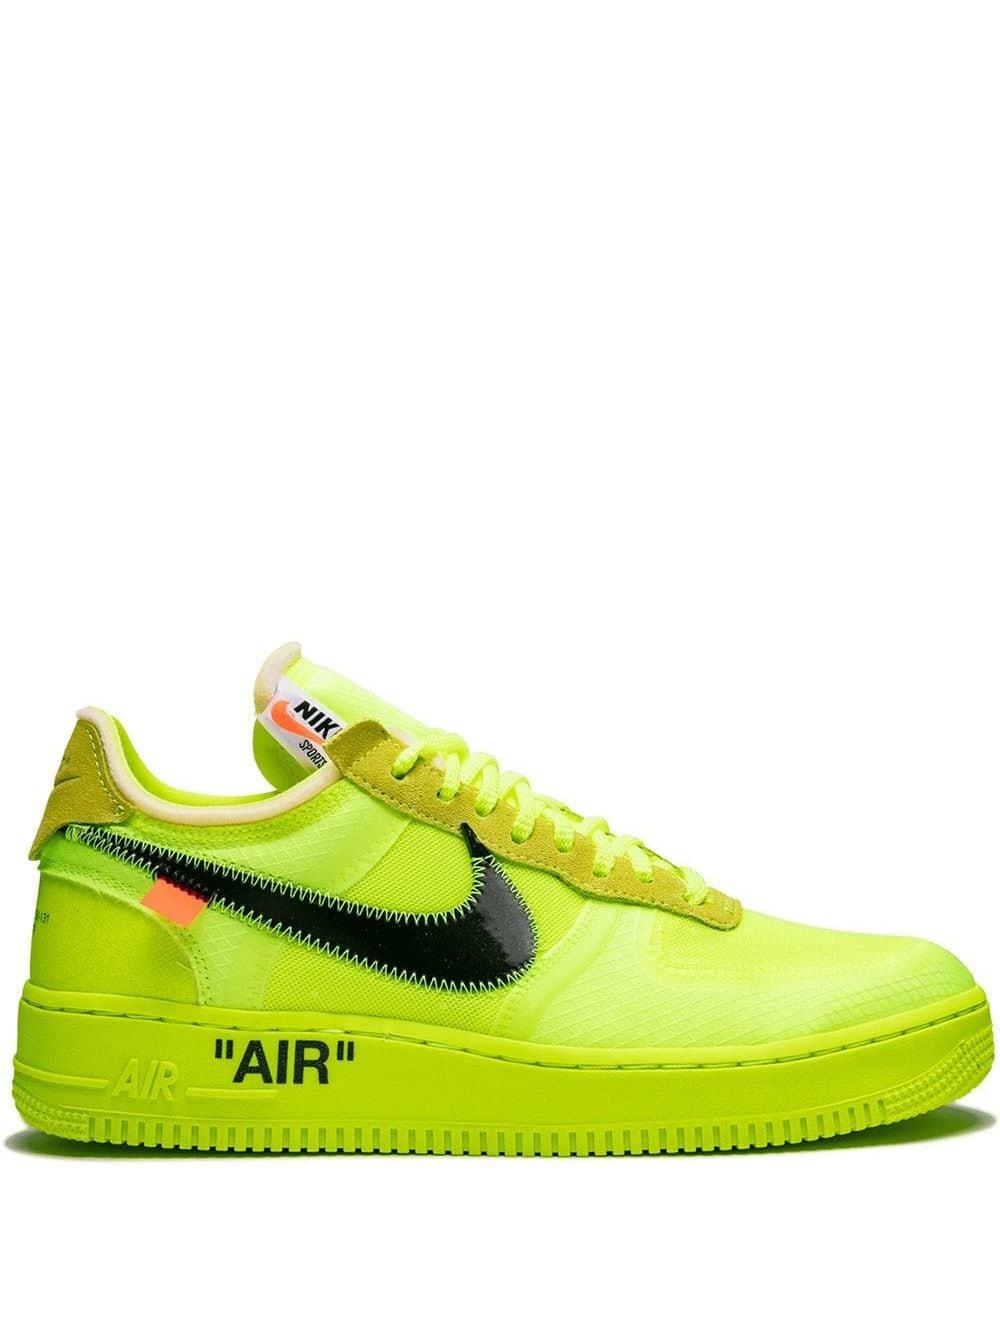 NIKE X OFF-WHITE The 10: Air Force 1 Low 'off-white Volt' Shoes in Green  (Yellow) for Men - Save 50% - Lyst